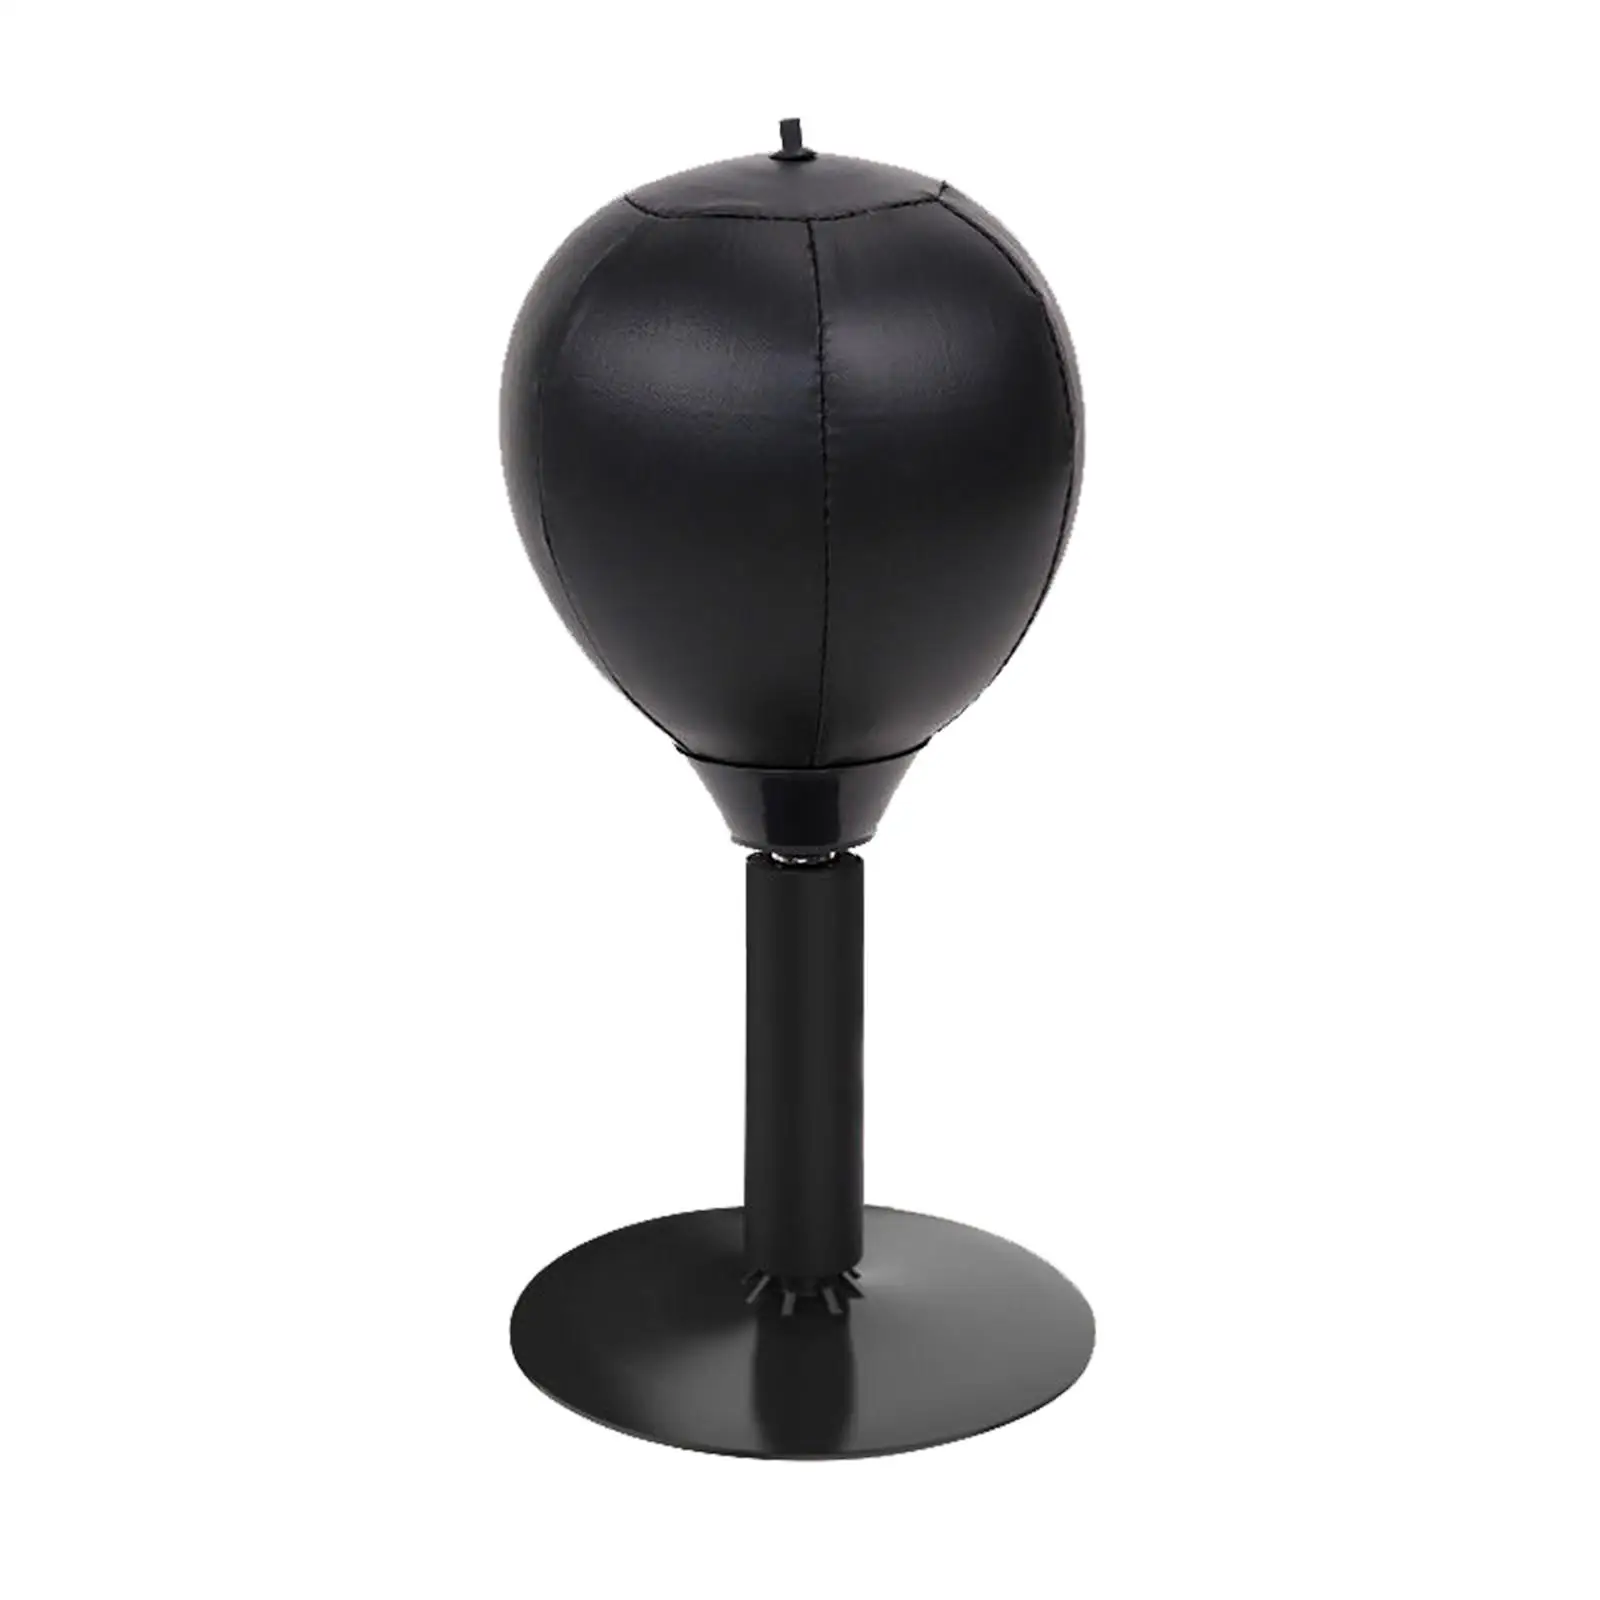 PU Punching Bag Inflatable Decompression Toys Freestanding Desktop Boxing Ball